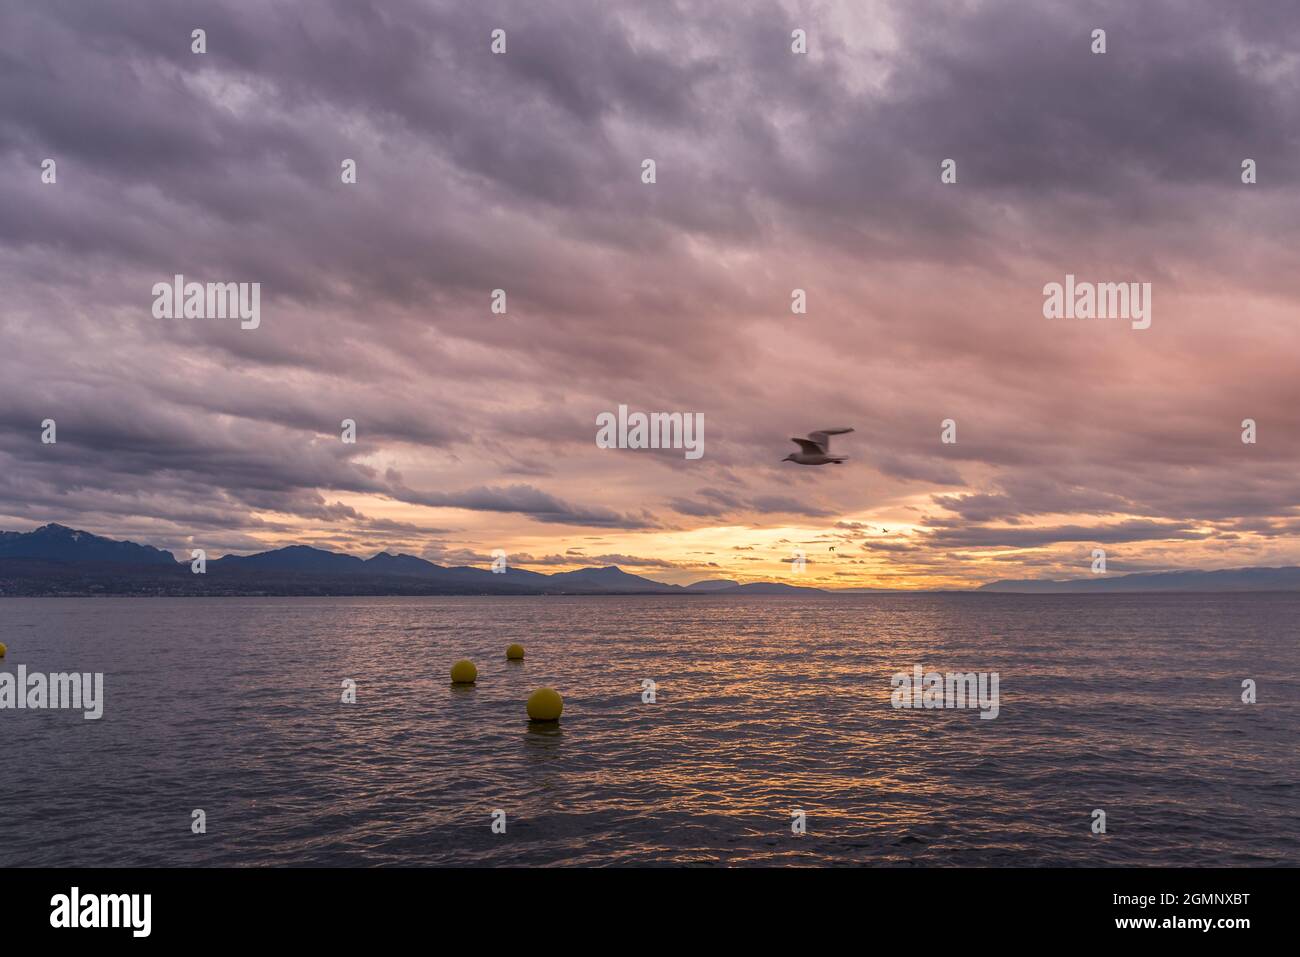 A seascape at sunset with buoys in the water and a seagull in flight. Concept of seascape. Stock Photo